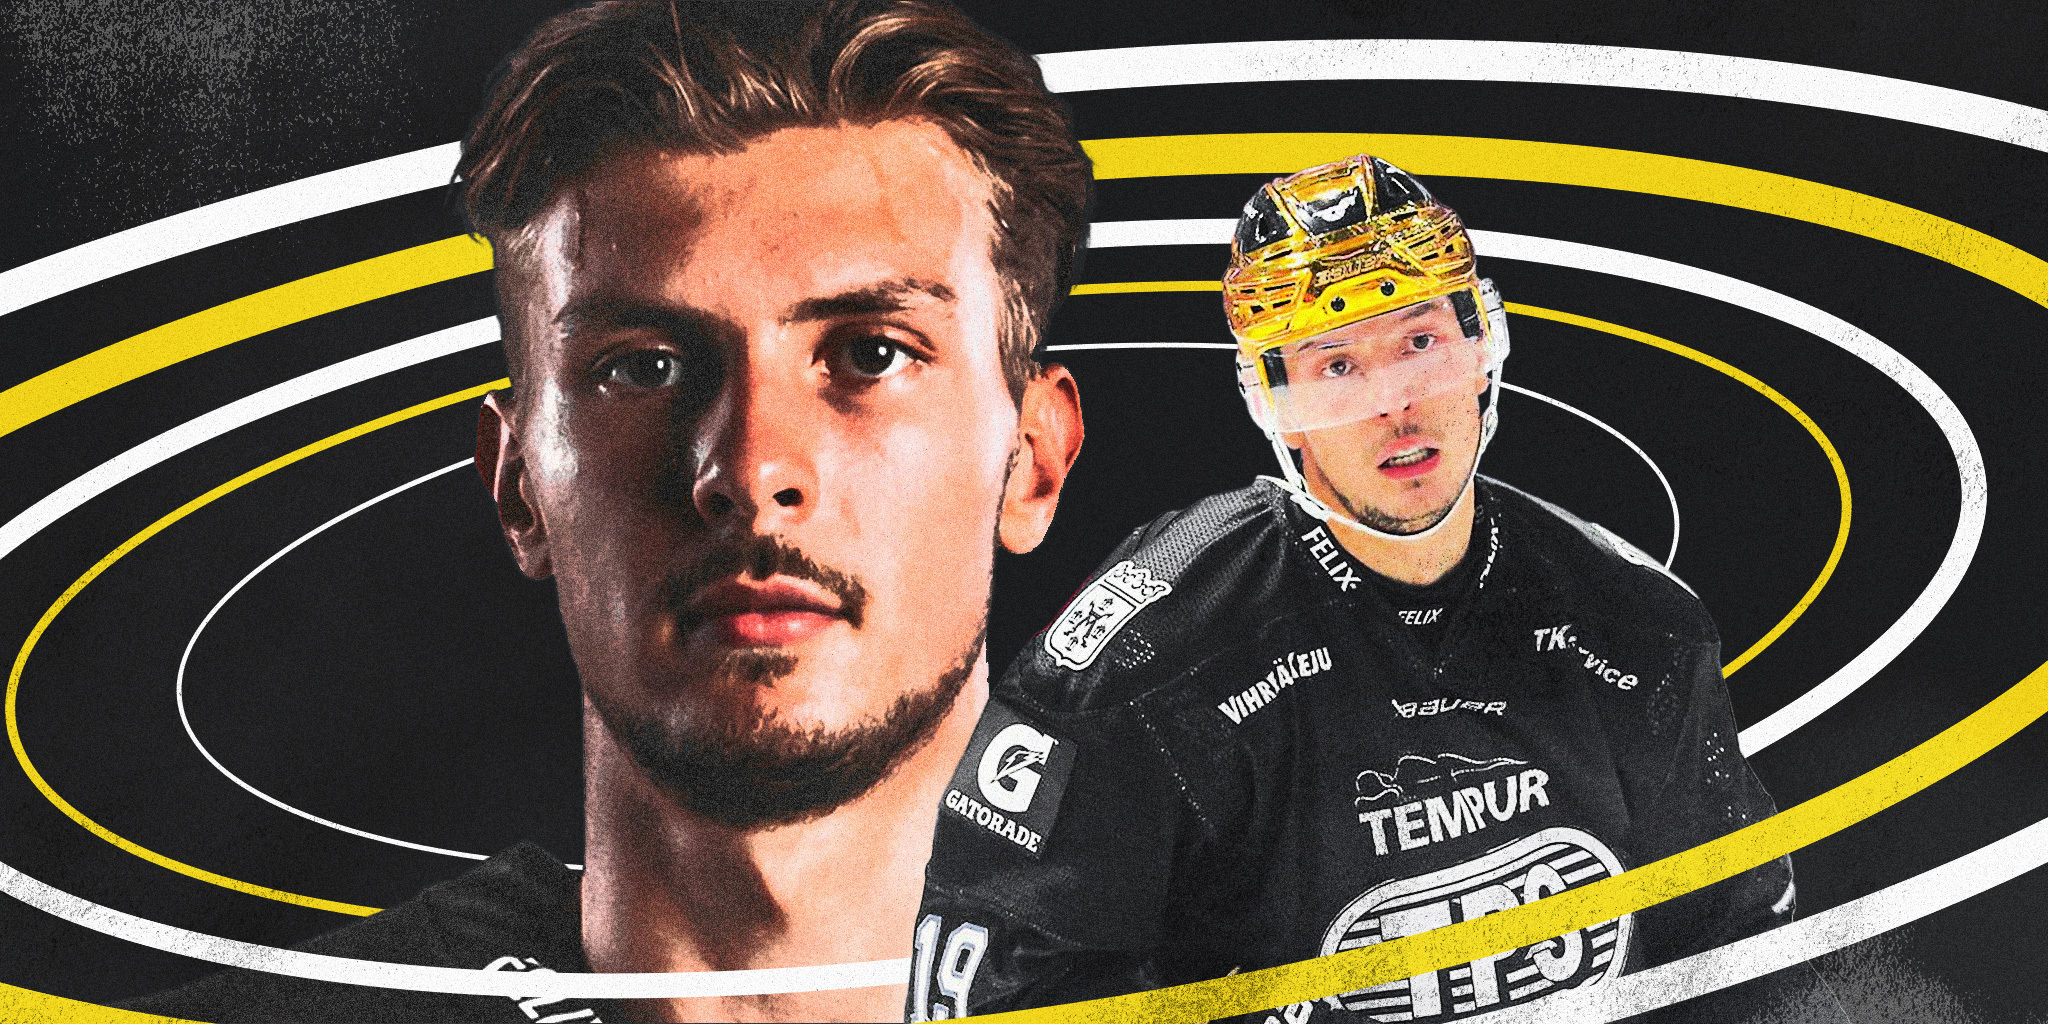 Valtteri Pulli is now grabbing NHL attention, what will the Finn bring to an organization?